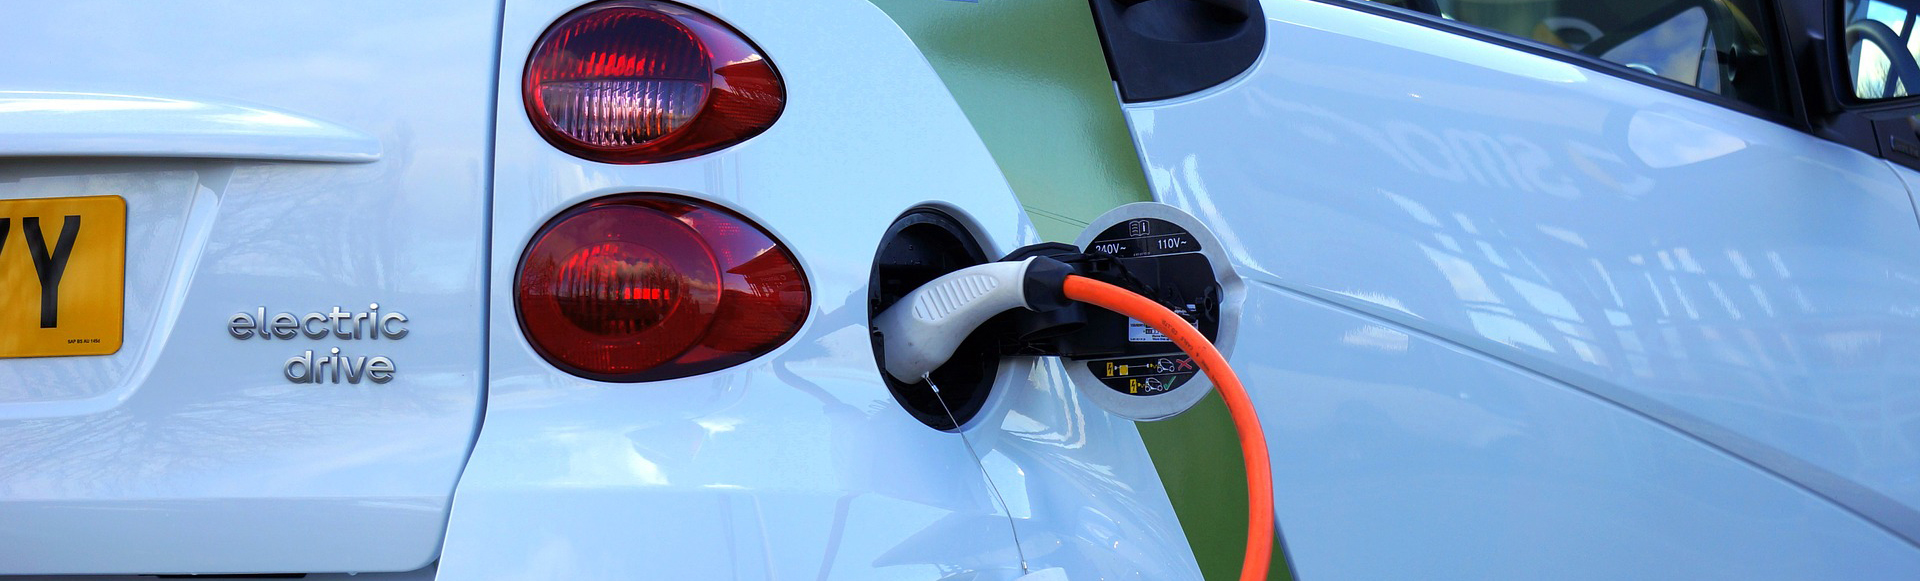 EV Charging Stations Provided Through Public-Private Partnership